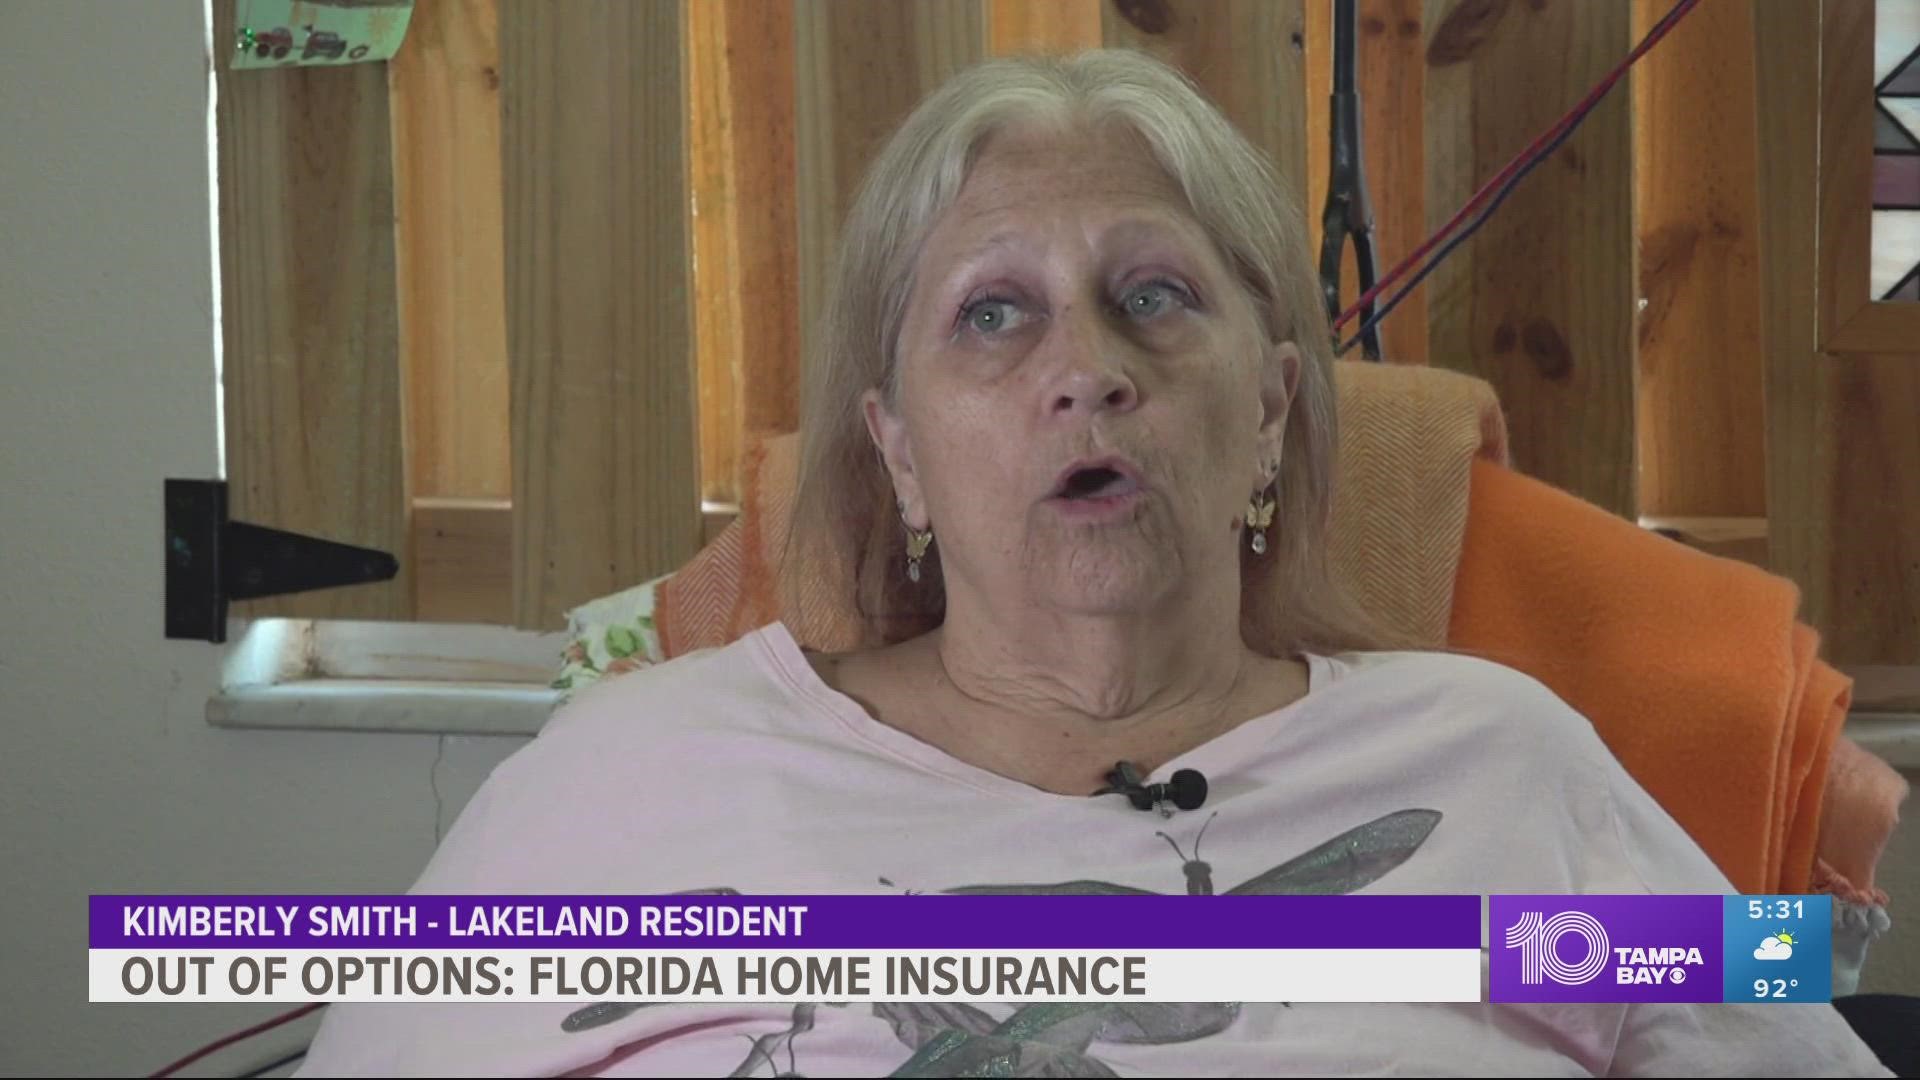 With fewer and fewer home insurance options in Florida, some homeowners are starting to look outside of the state.